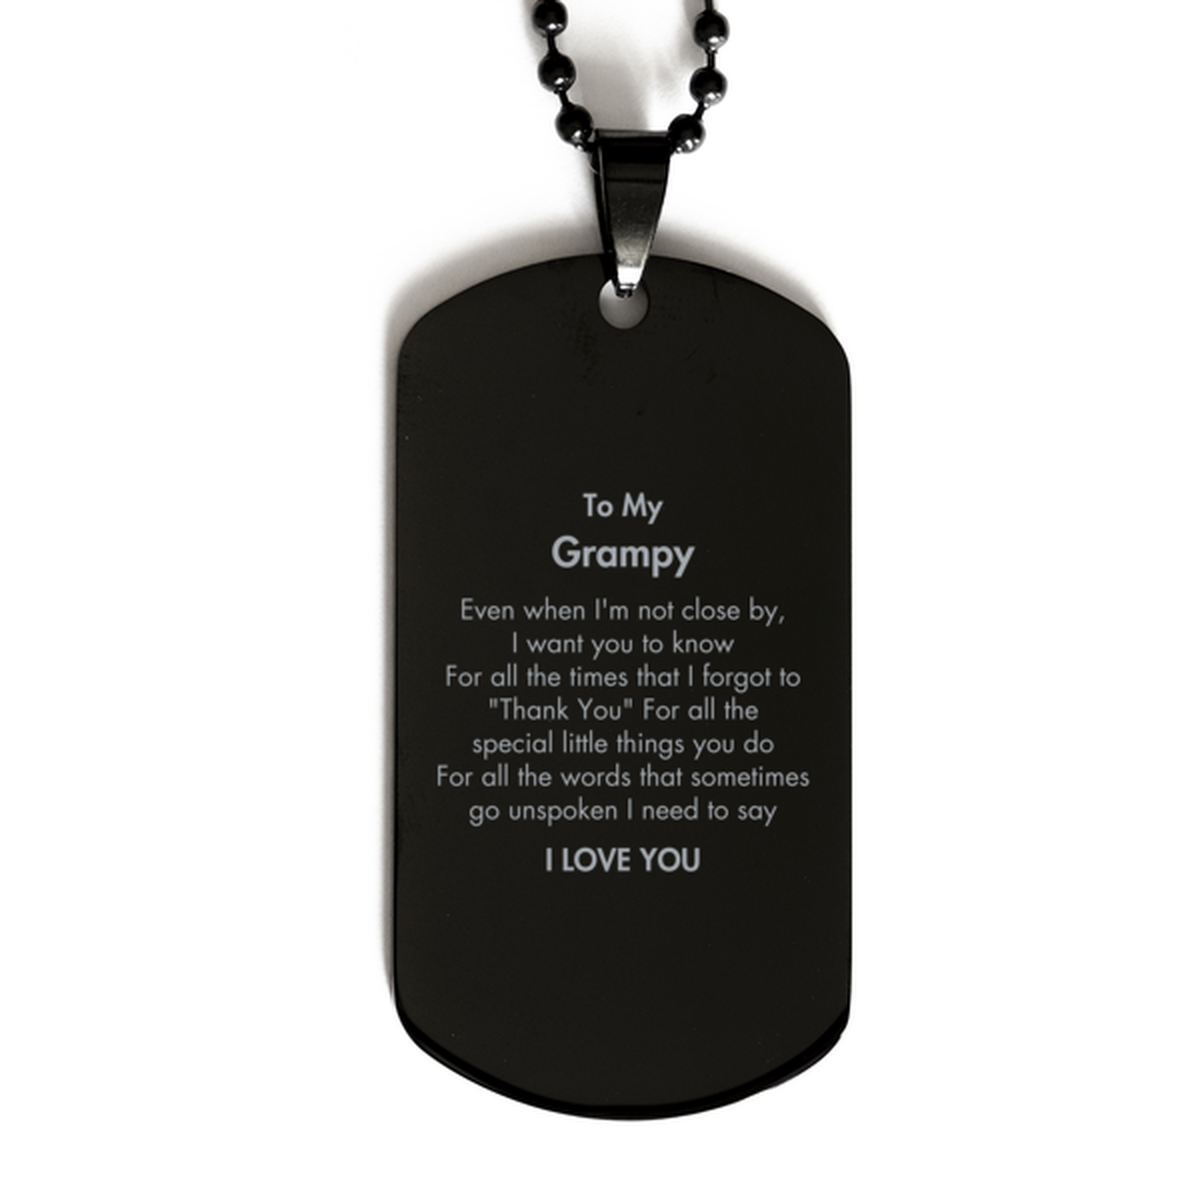 Thank You Gifts for Grampy, Keepsake Black Dog Tag Gifts for Grampy Birthday Mother's day Father's Day Grampy For all the words That sometimes go unspoken I need to say I LOVE YOU